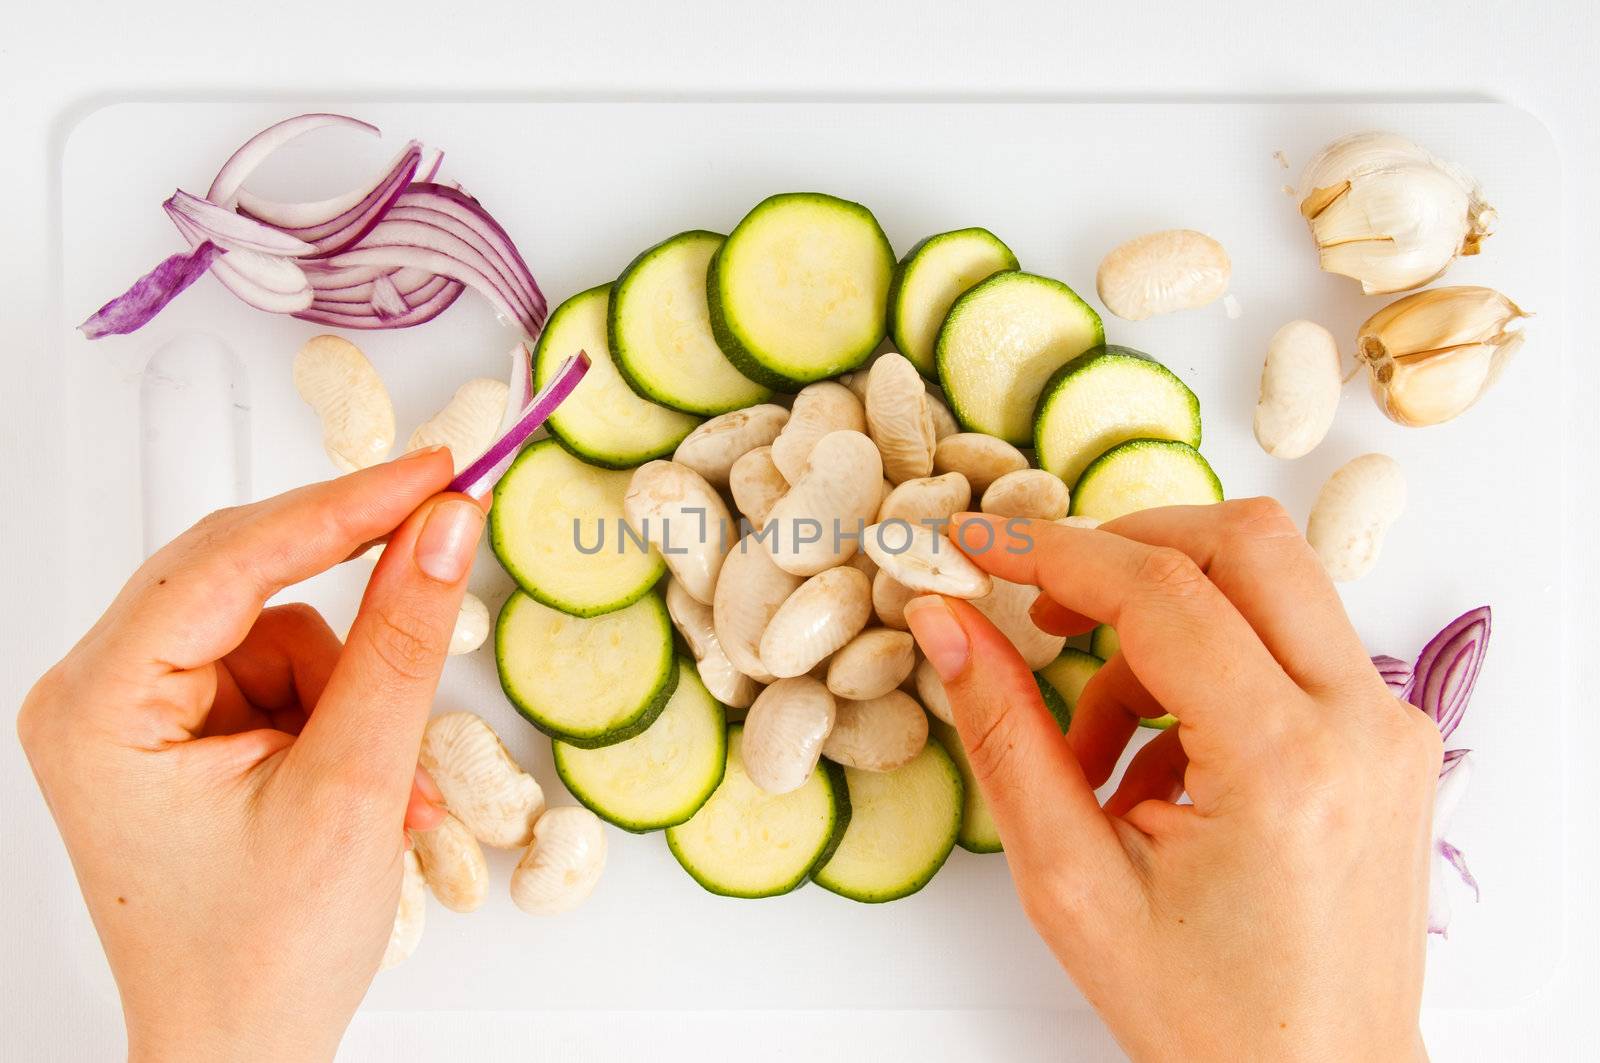 composition of vegetables with your hands on white trays